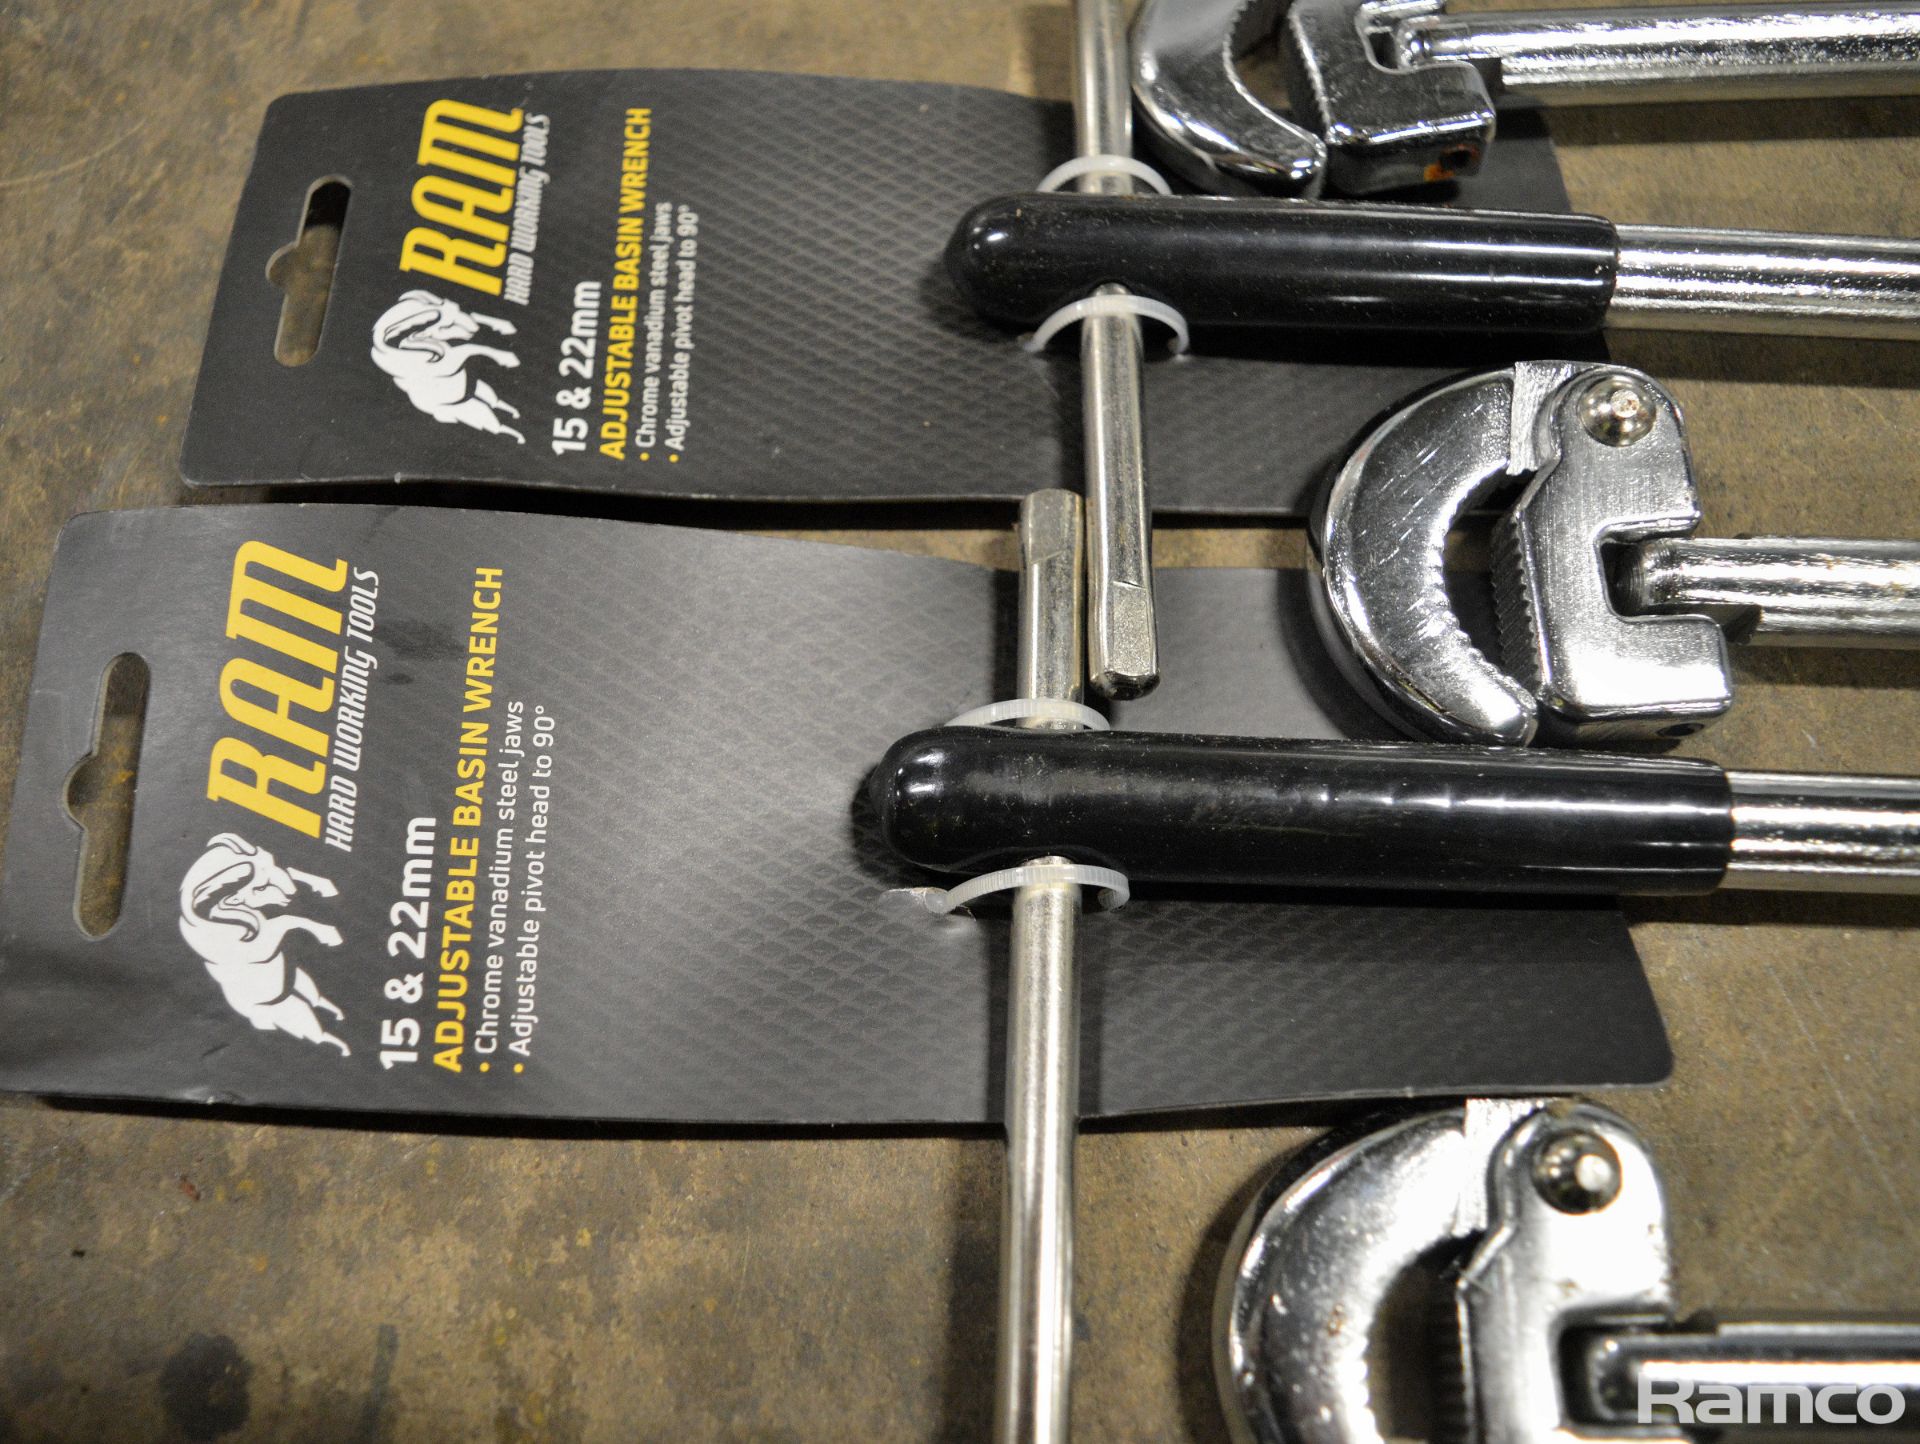 5x Ram 15 & 22mm Adjustable Basin Wrenches - Image 2 of 3